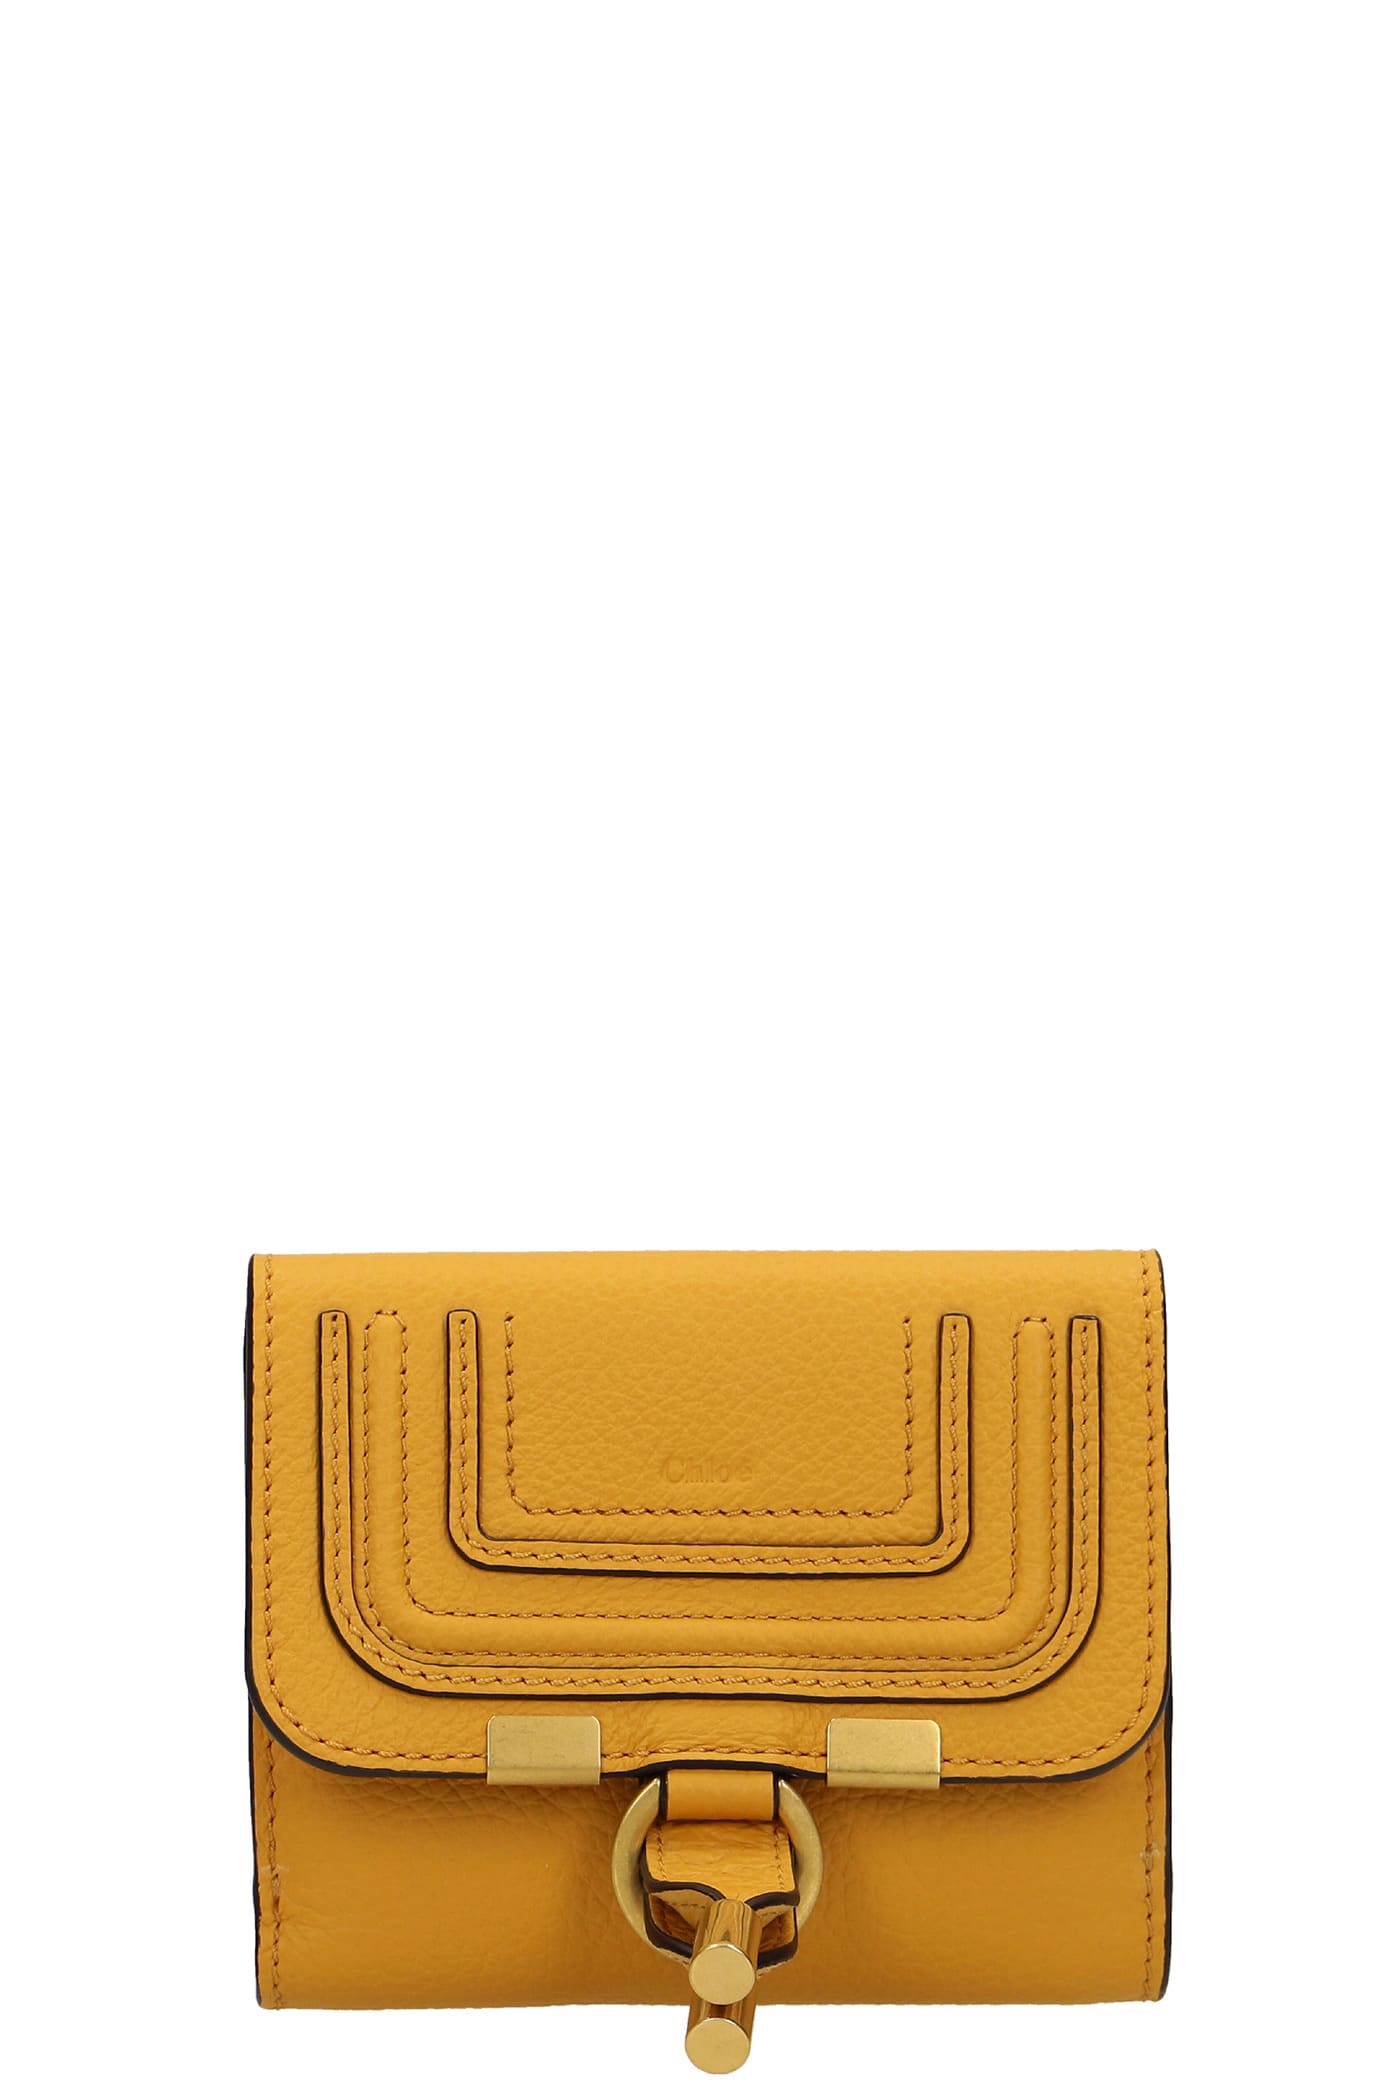 Chloé Marcie Wallet In Yellow Leather